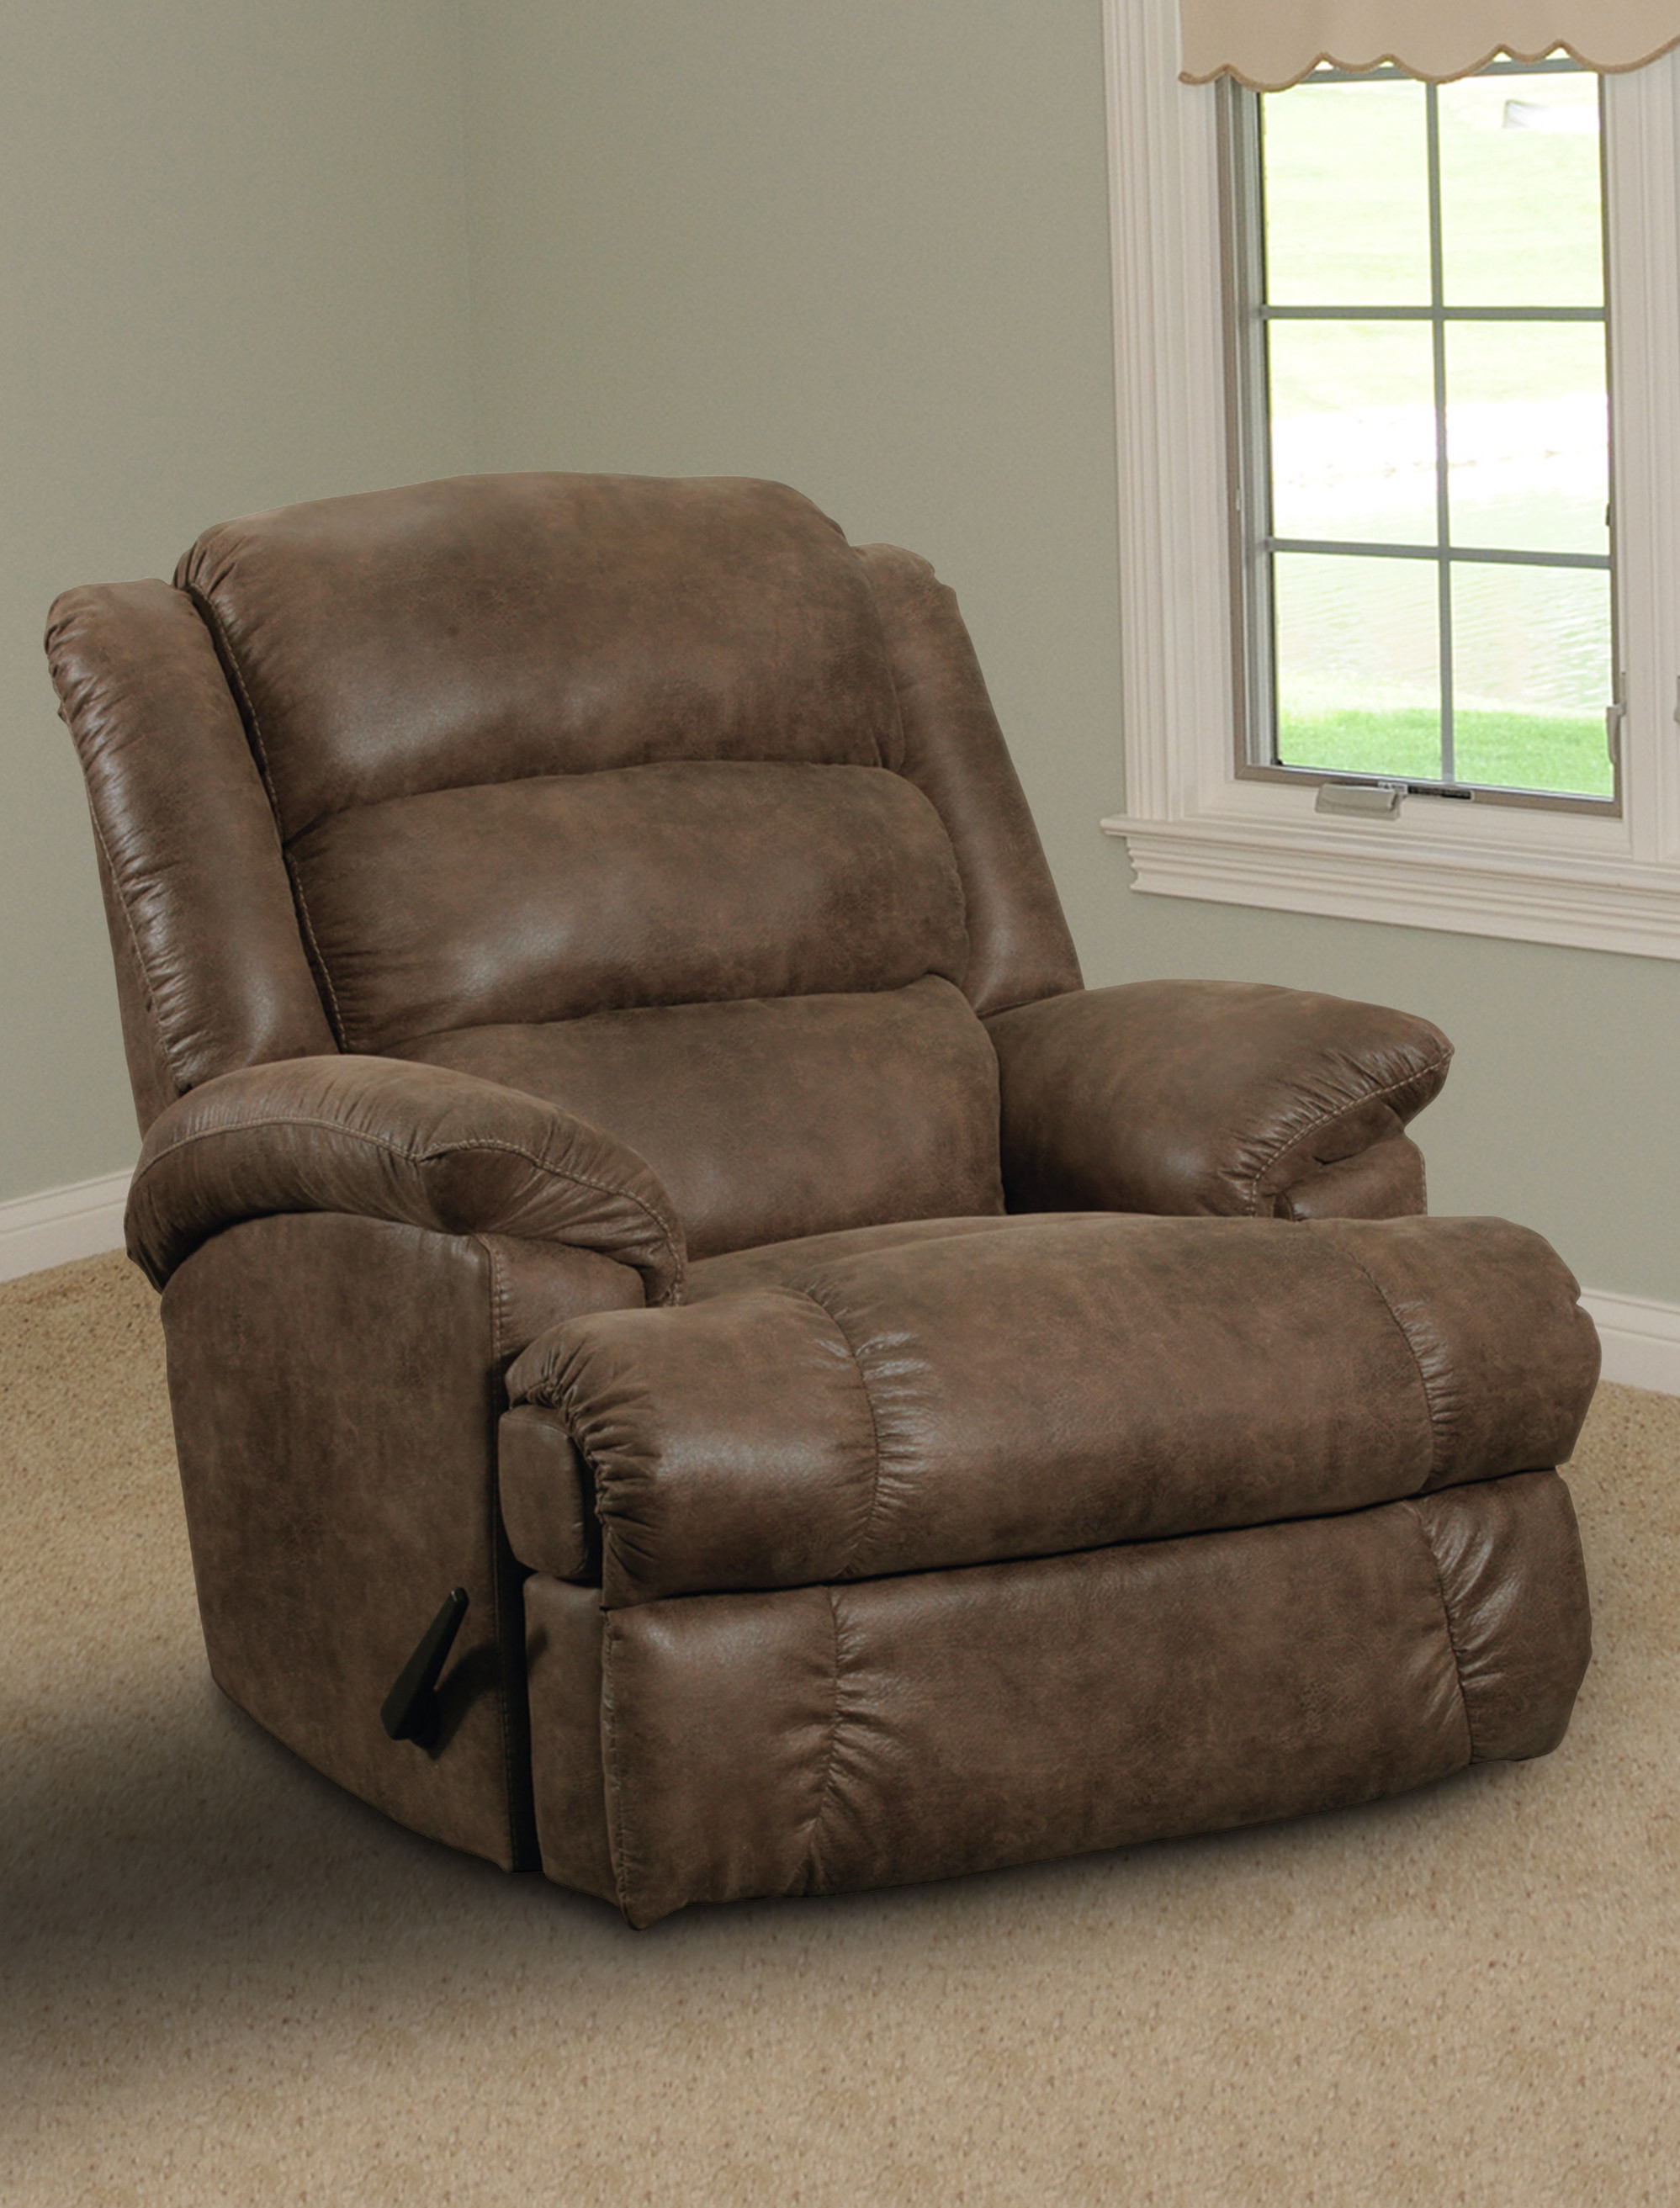 Lane Furniture Miguel Power Lift Recliner Recliners From